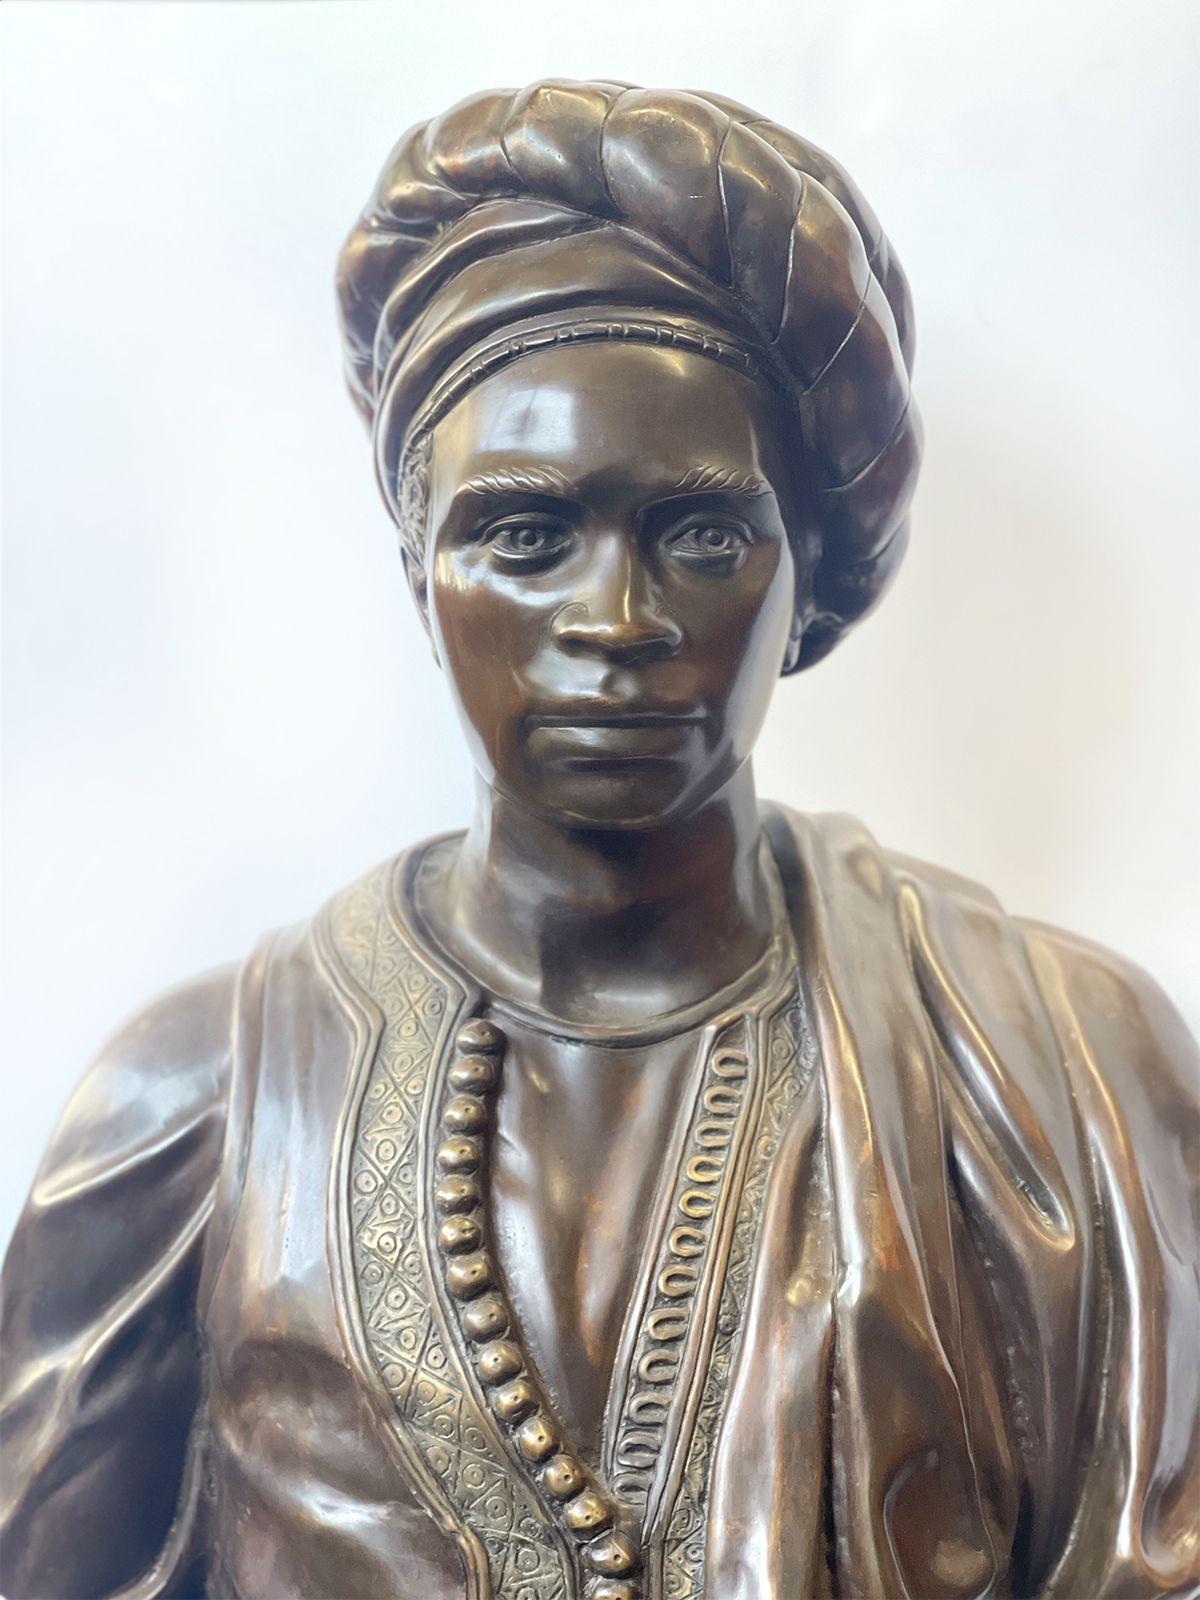 Nègre du Soudan bronze bust with marble base after Charles Henri-Joseph. Made in France, c. 1860's.
Dimensions:
39